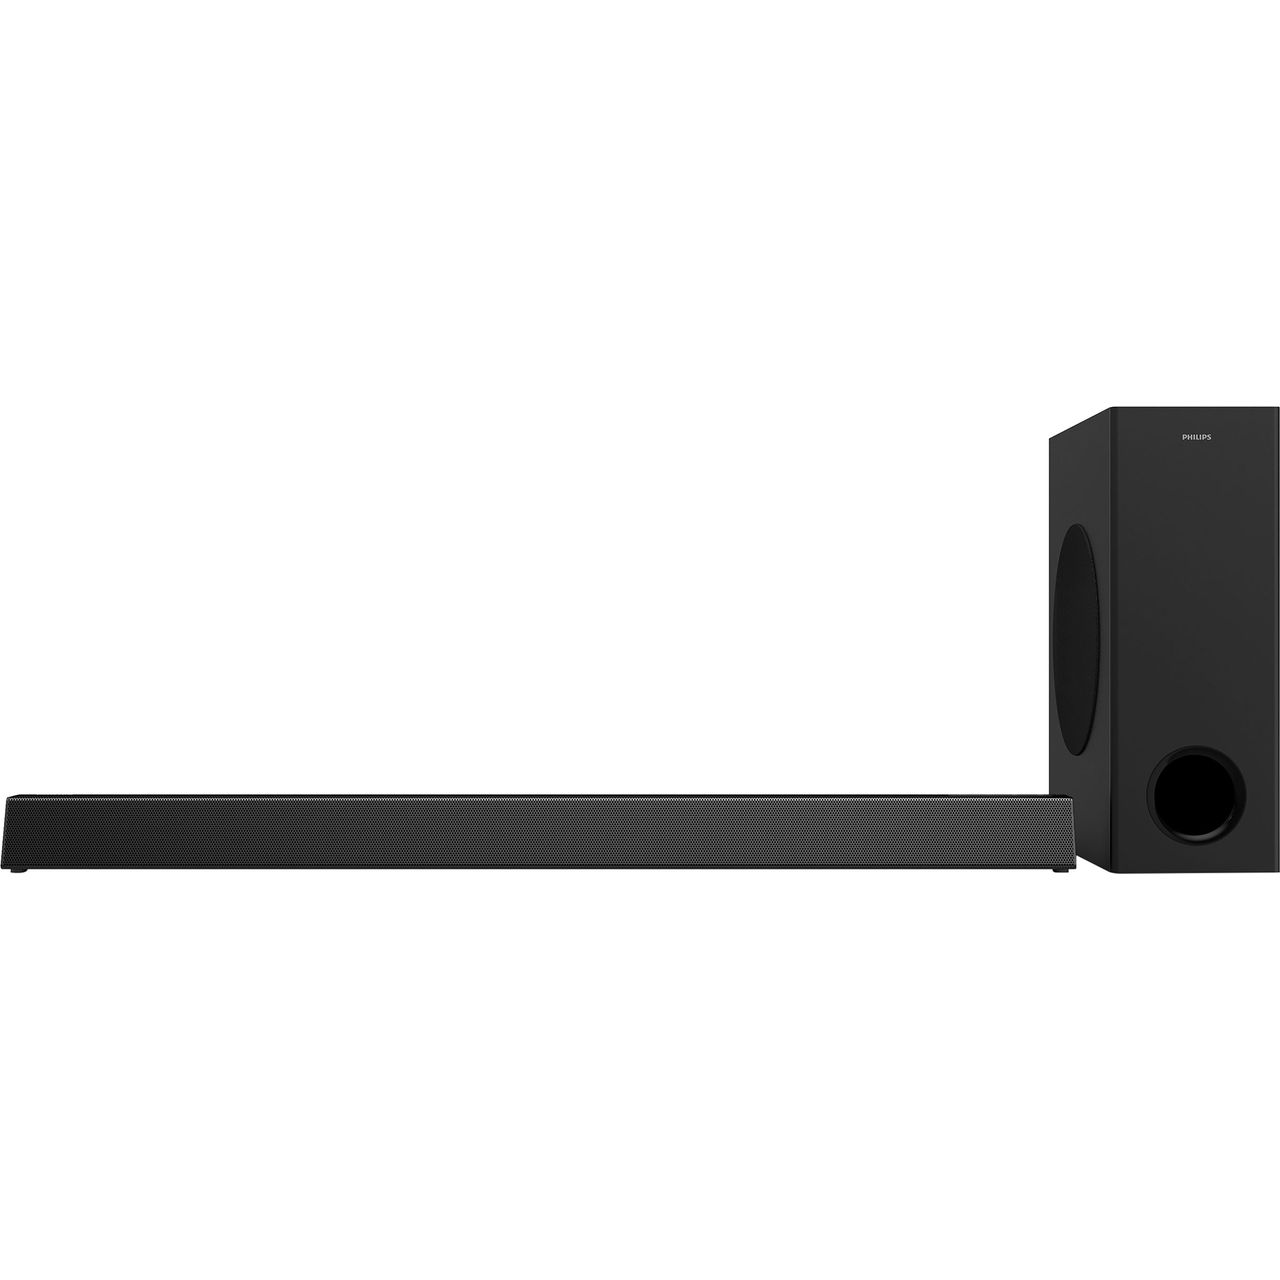 Philips HTL3320 Multiroom Bluetooth 3.1 Soundbar with Wireless Subwoofer Review